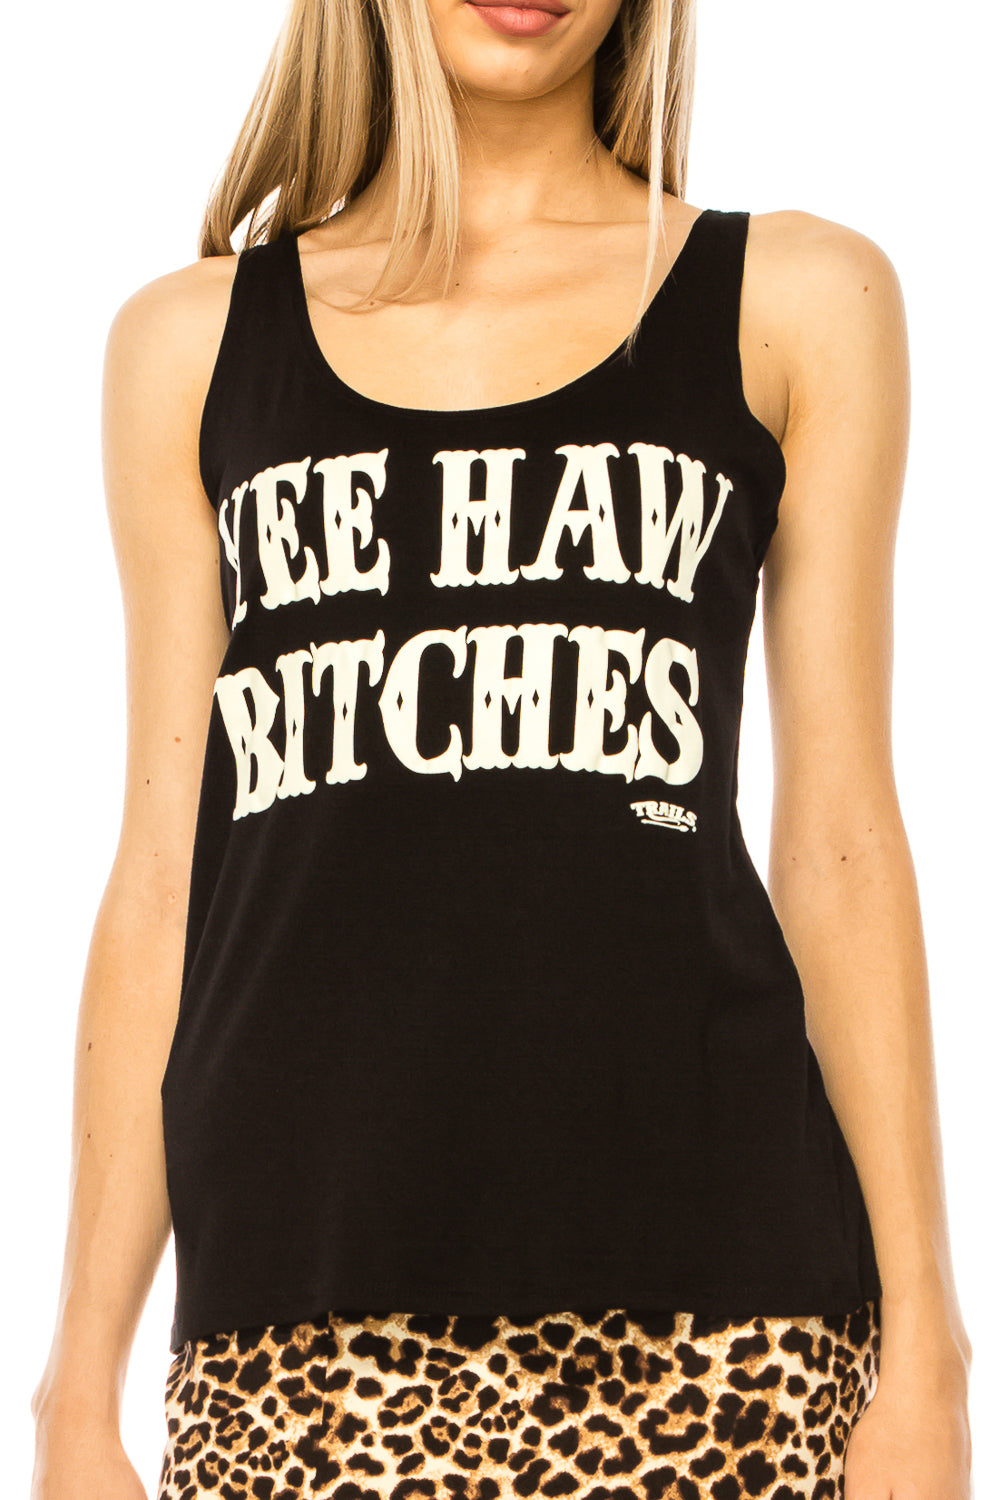 YEE HAW BITCHES TANK TOP - Trailsclothing.com